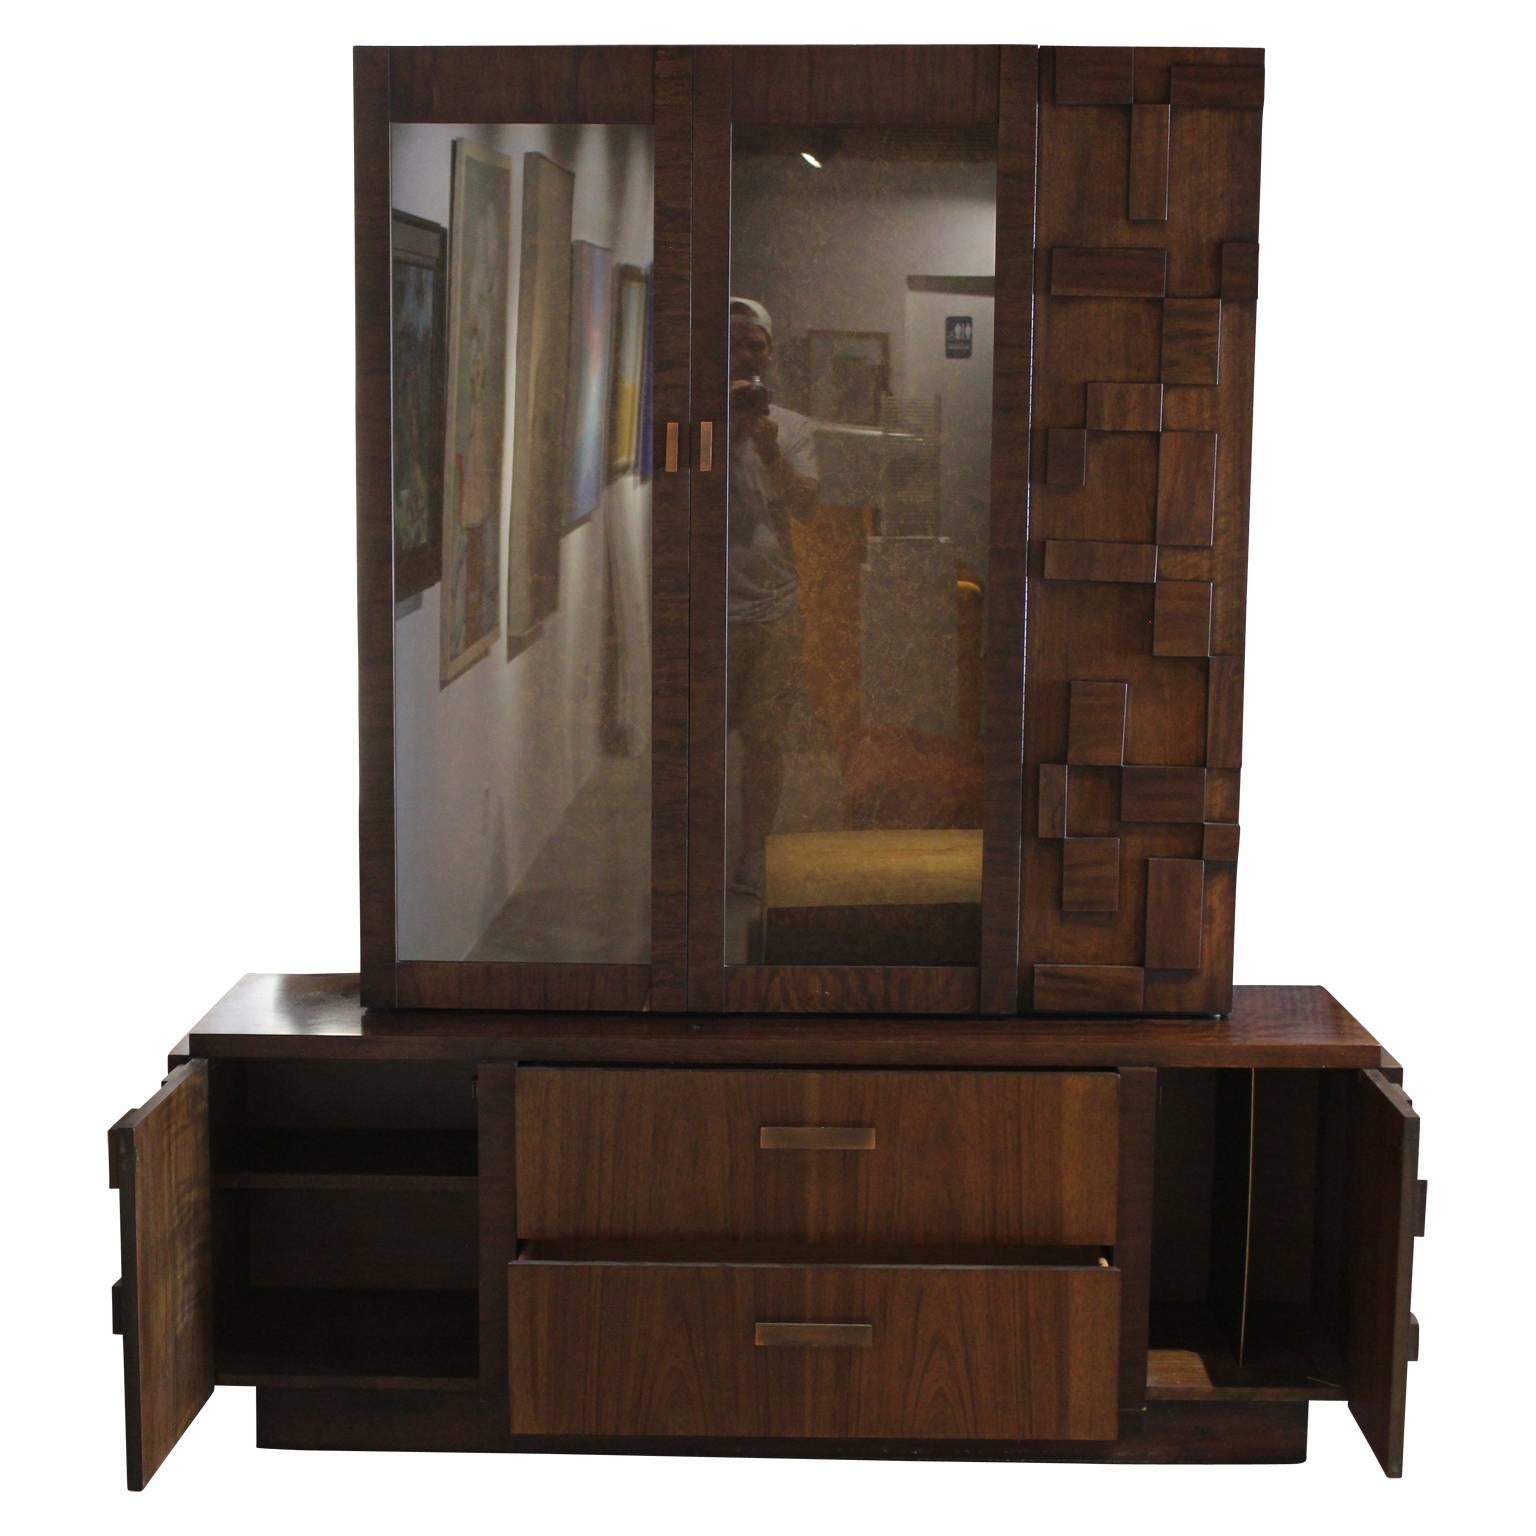 Modern Lane brutalist hutch or cabinet made from walnut in the style of Paul Evans. Accessorized with copper handles. Comes with three glass shelves and features two drawers on the bottom.